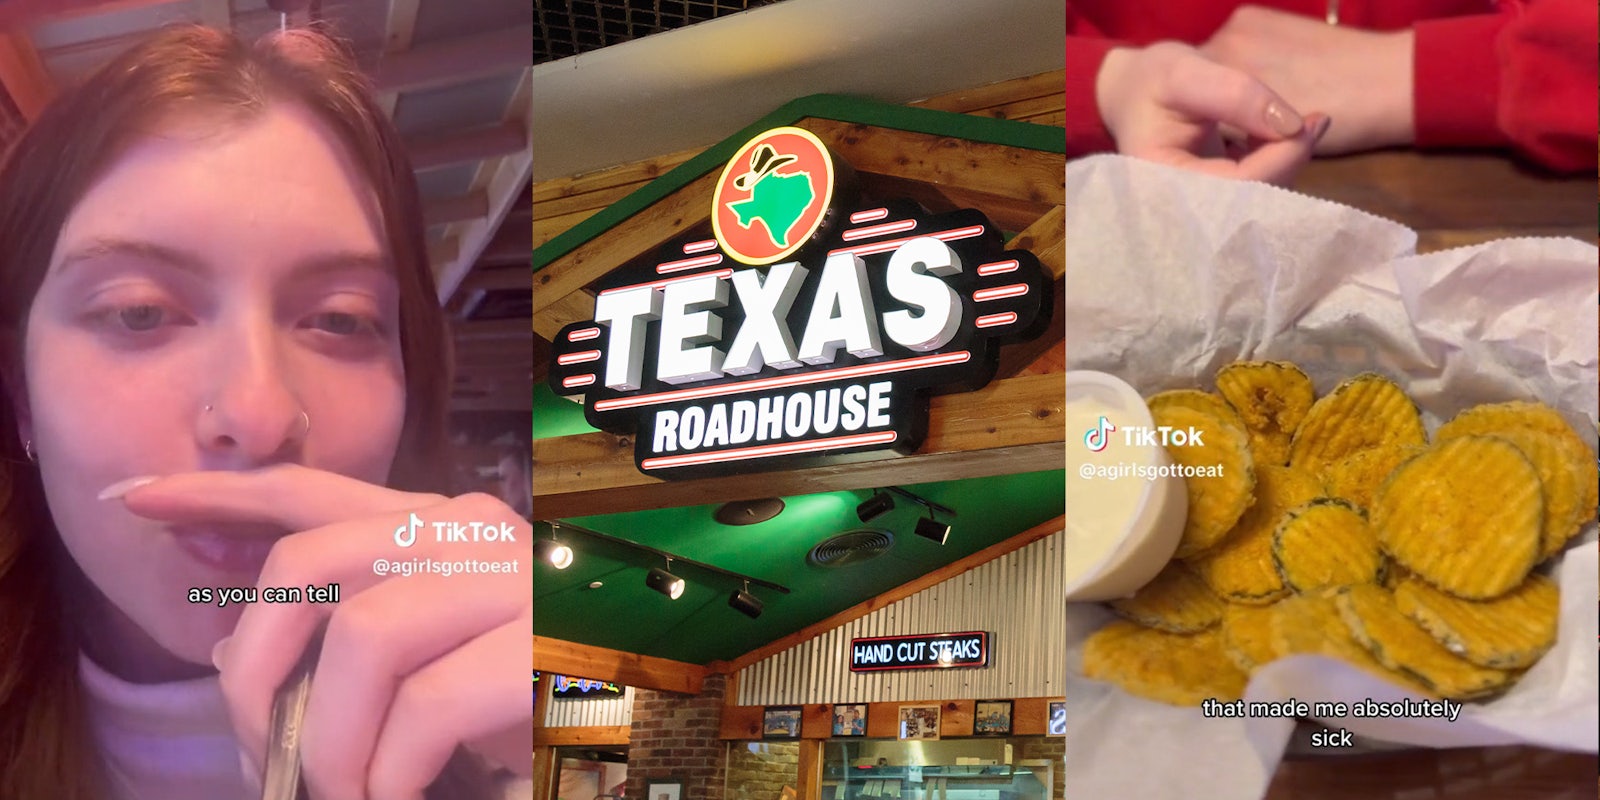 Customer says she got food poisoning from Texas Roadhouse